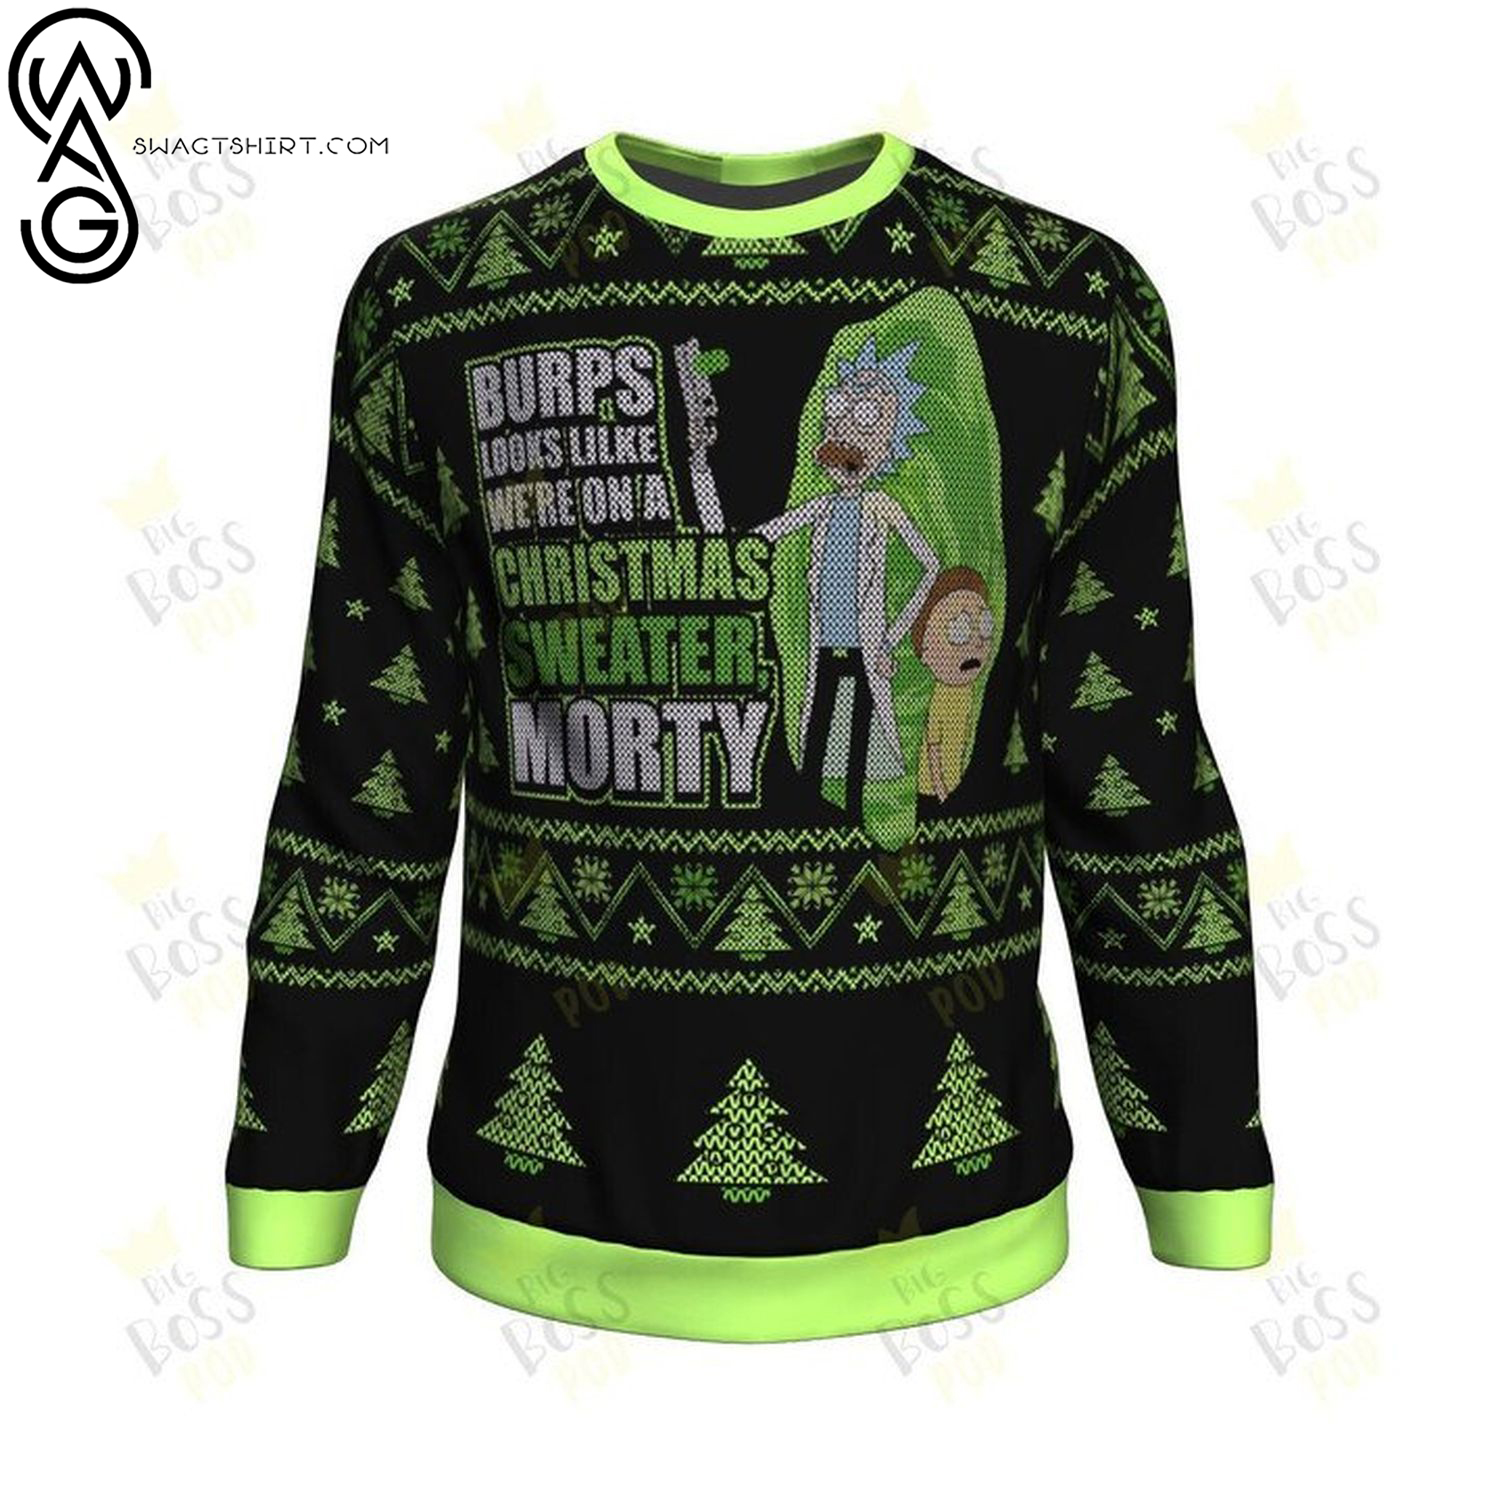 Rick and morty burps look like we're on a christmas sweater ugly christmas sweater - Copy